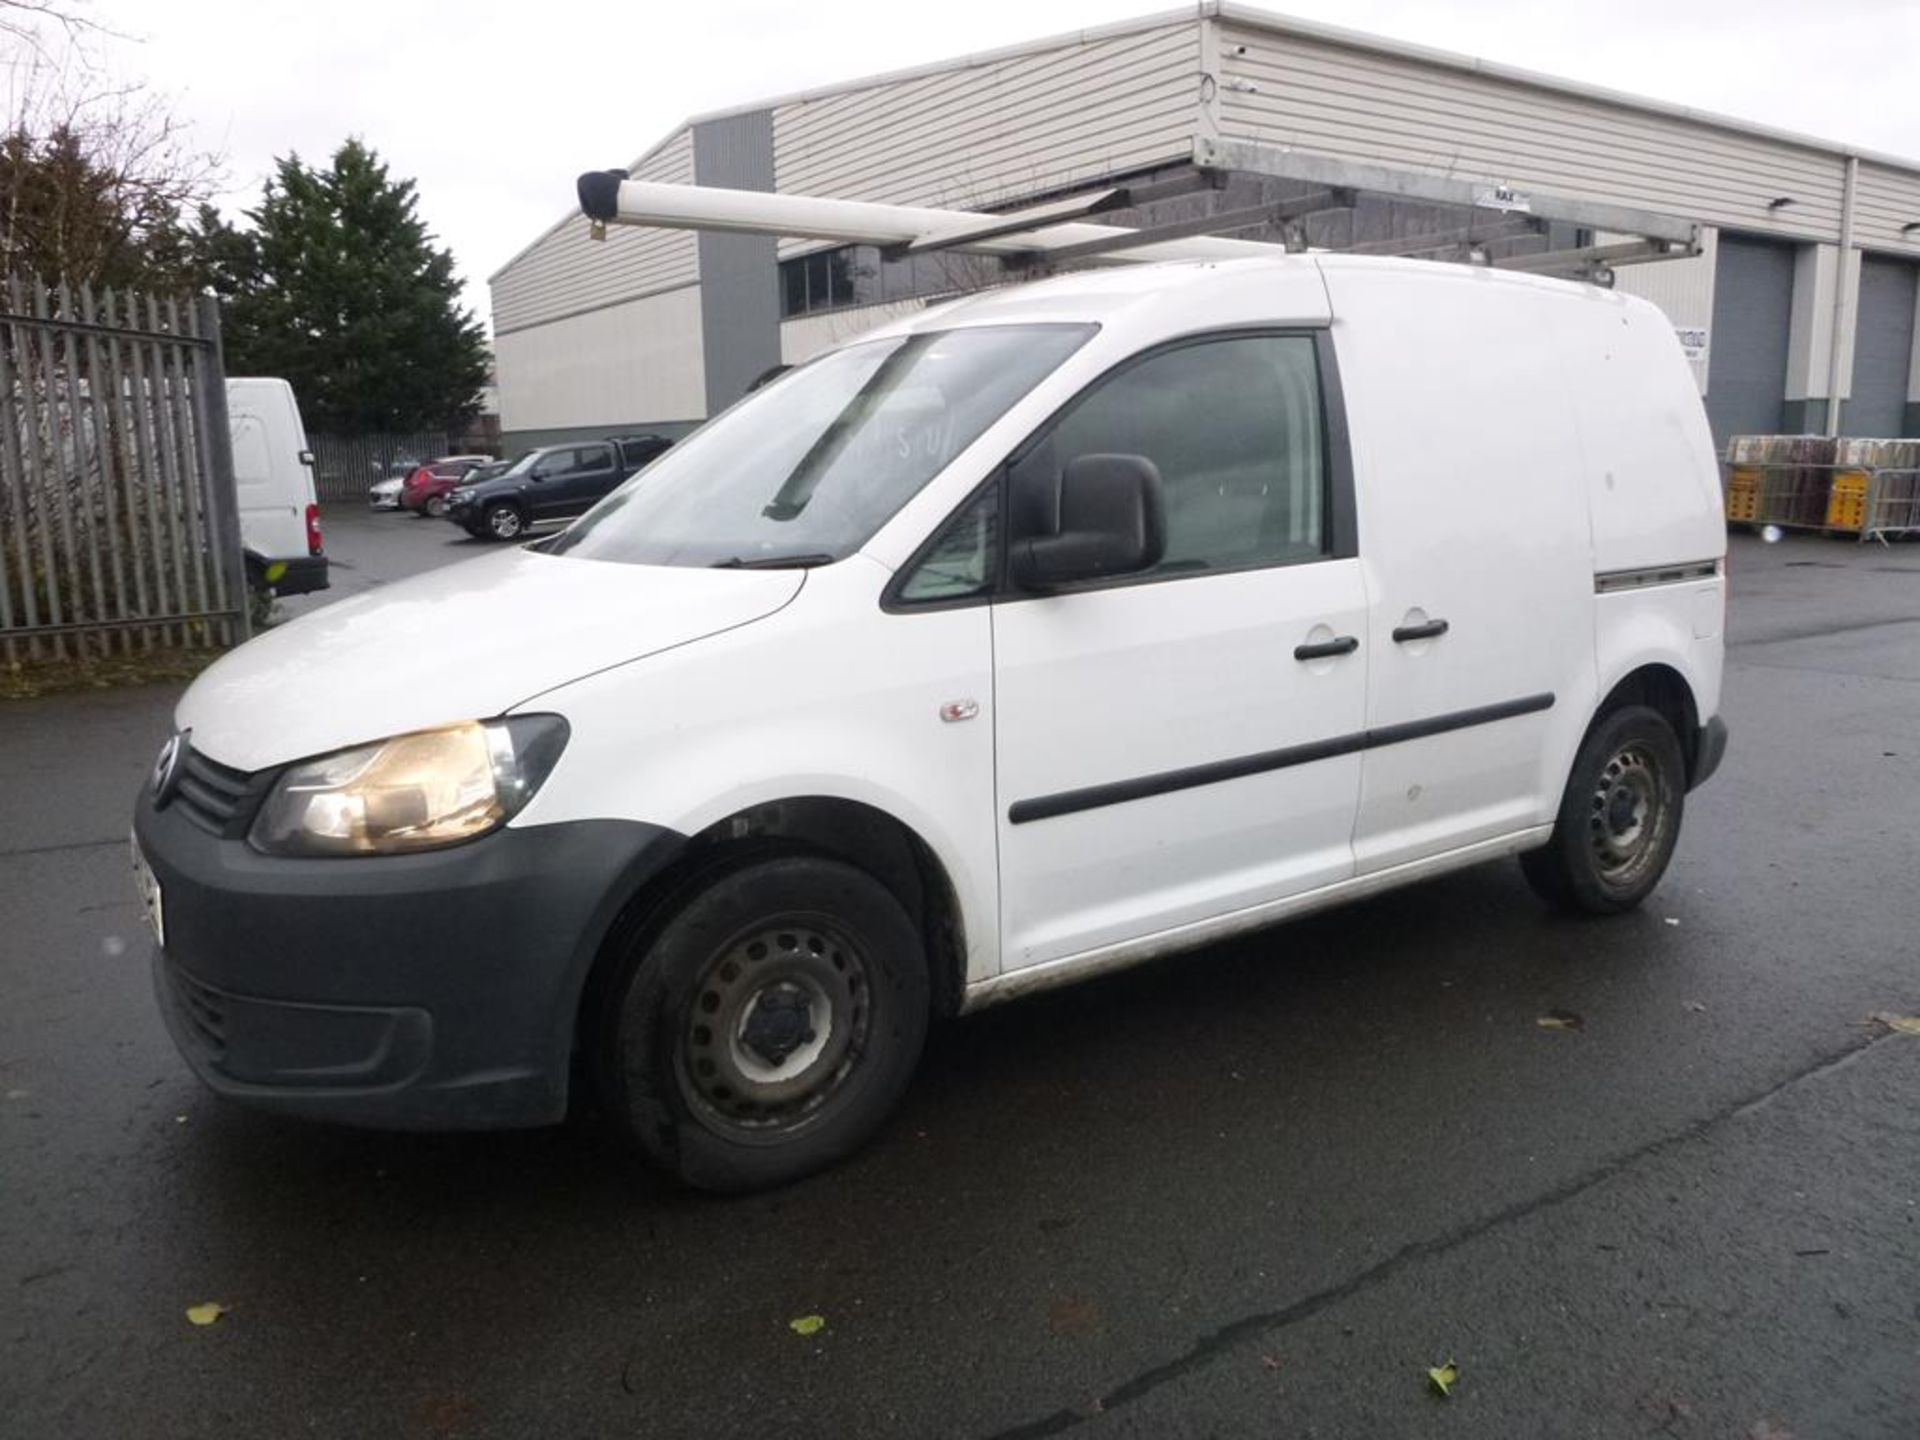 * 2011 Volkswagen Caddy 1598cc Diesel, Revenue Weight 2175Kg, fitted with Rail Rack and Internal - Image 5 of 13